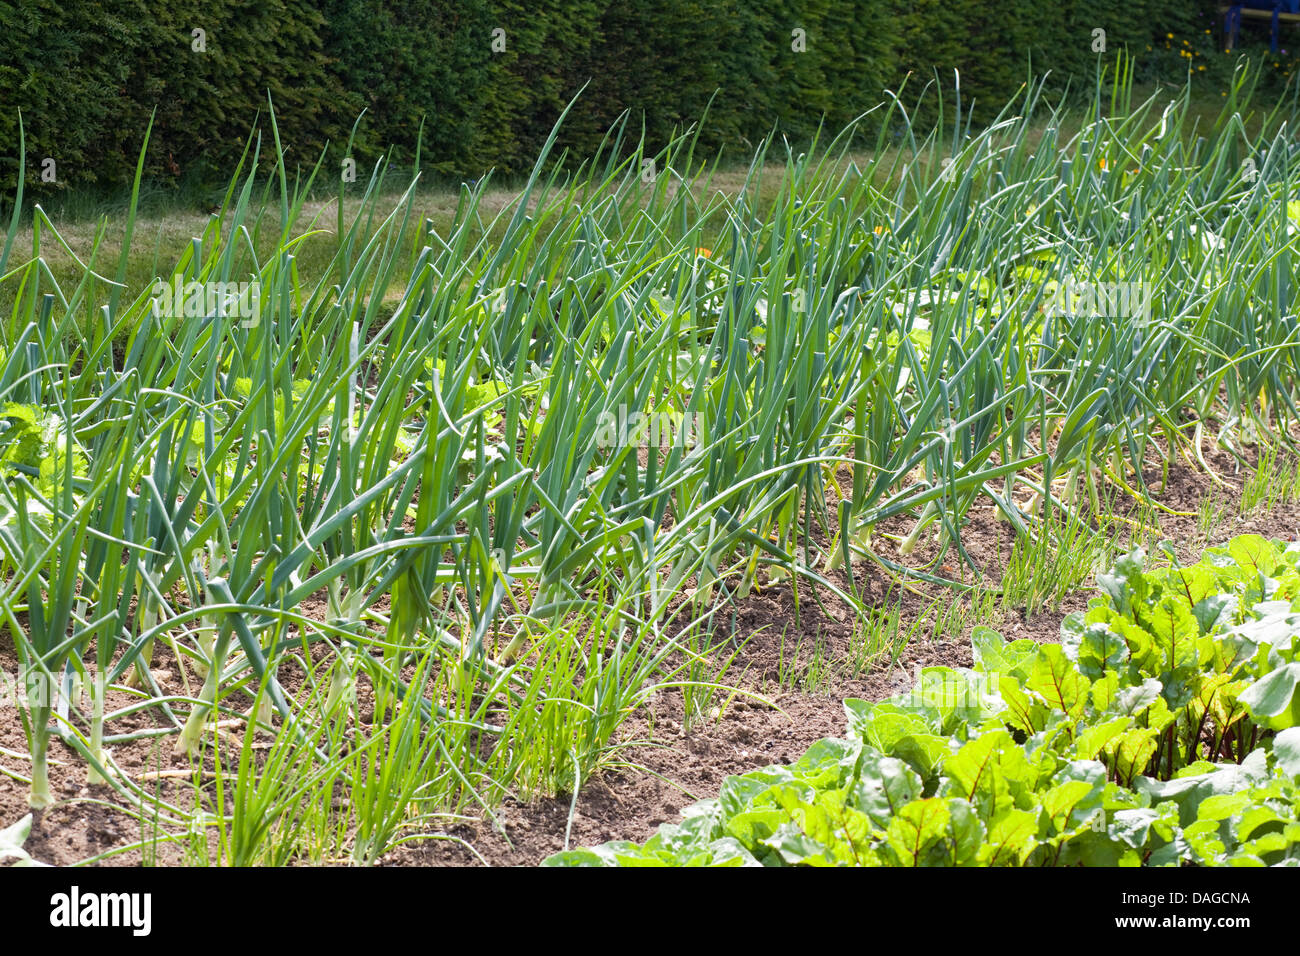 Onions and Chives growing in a Garden Stock Photo